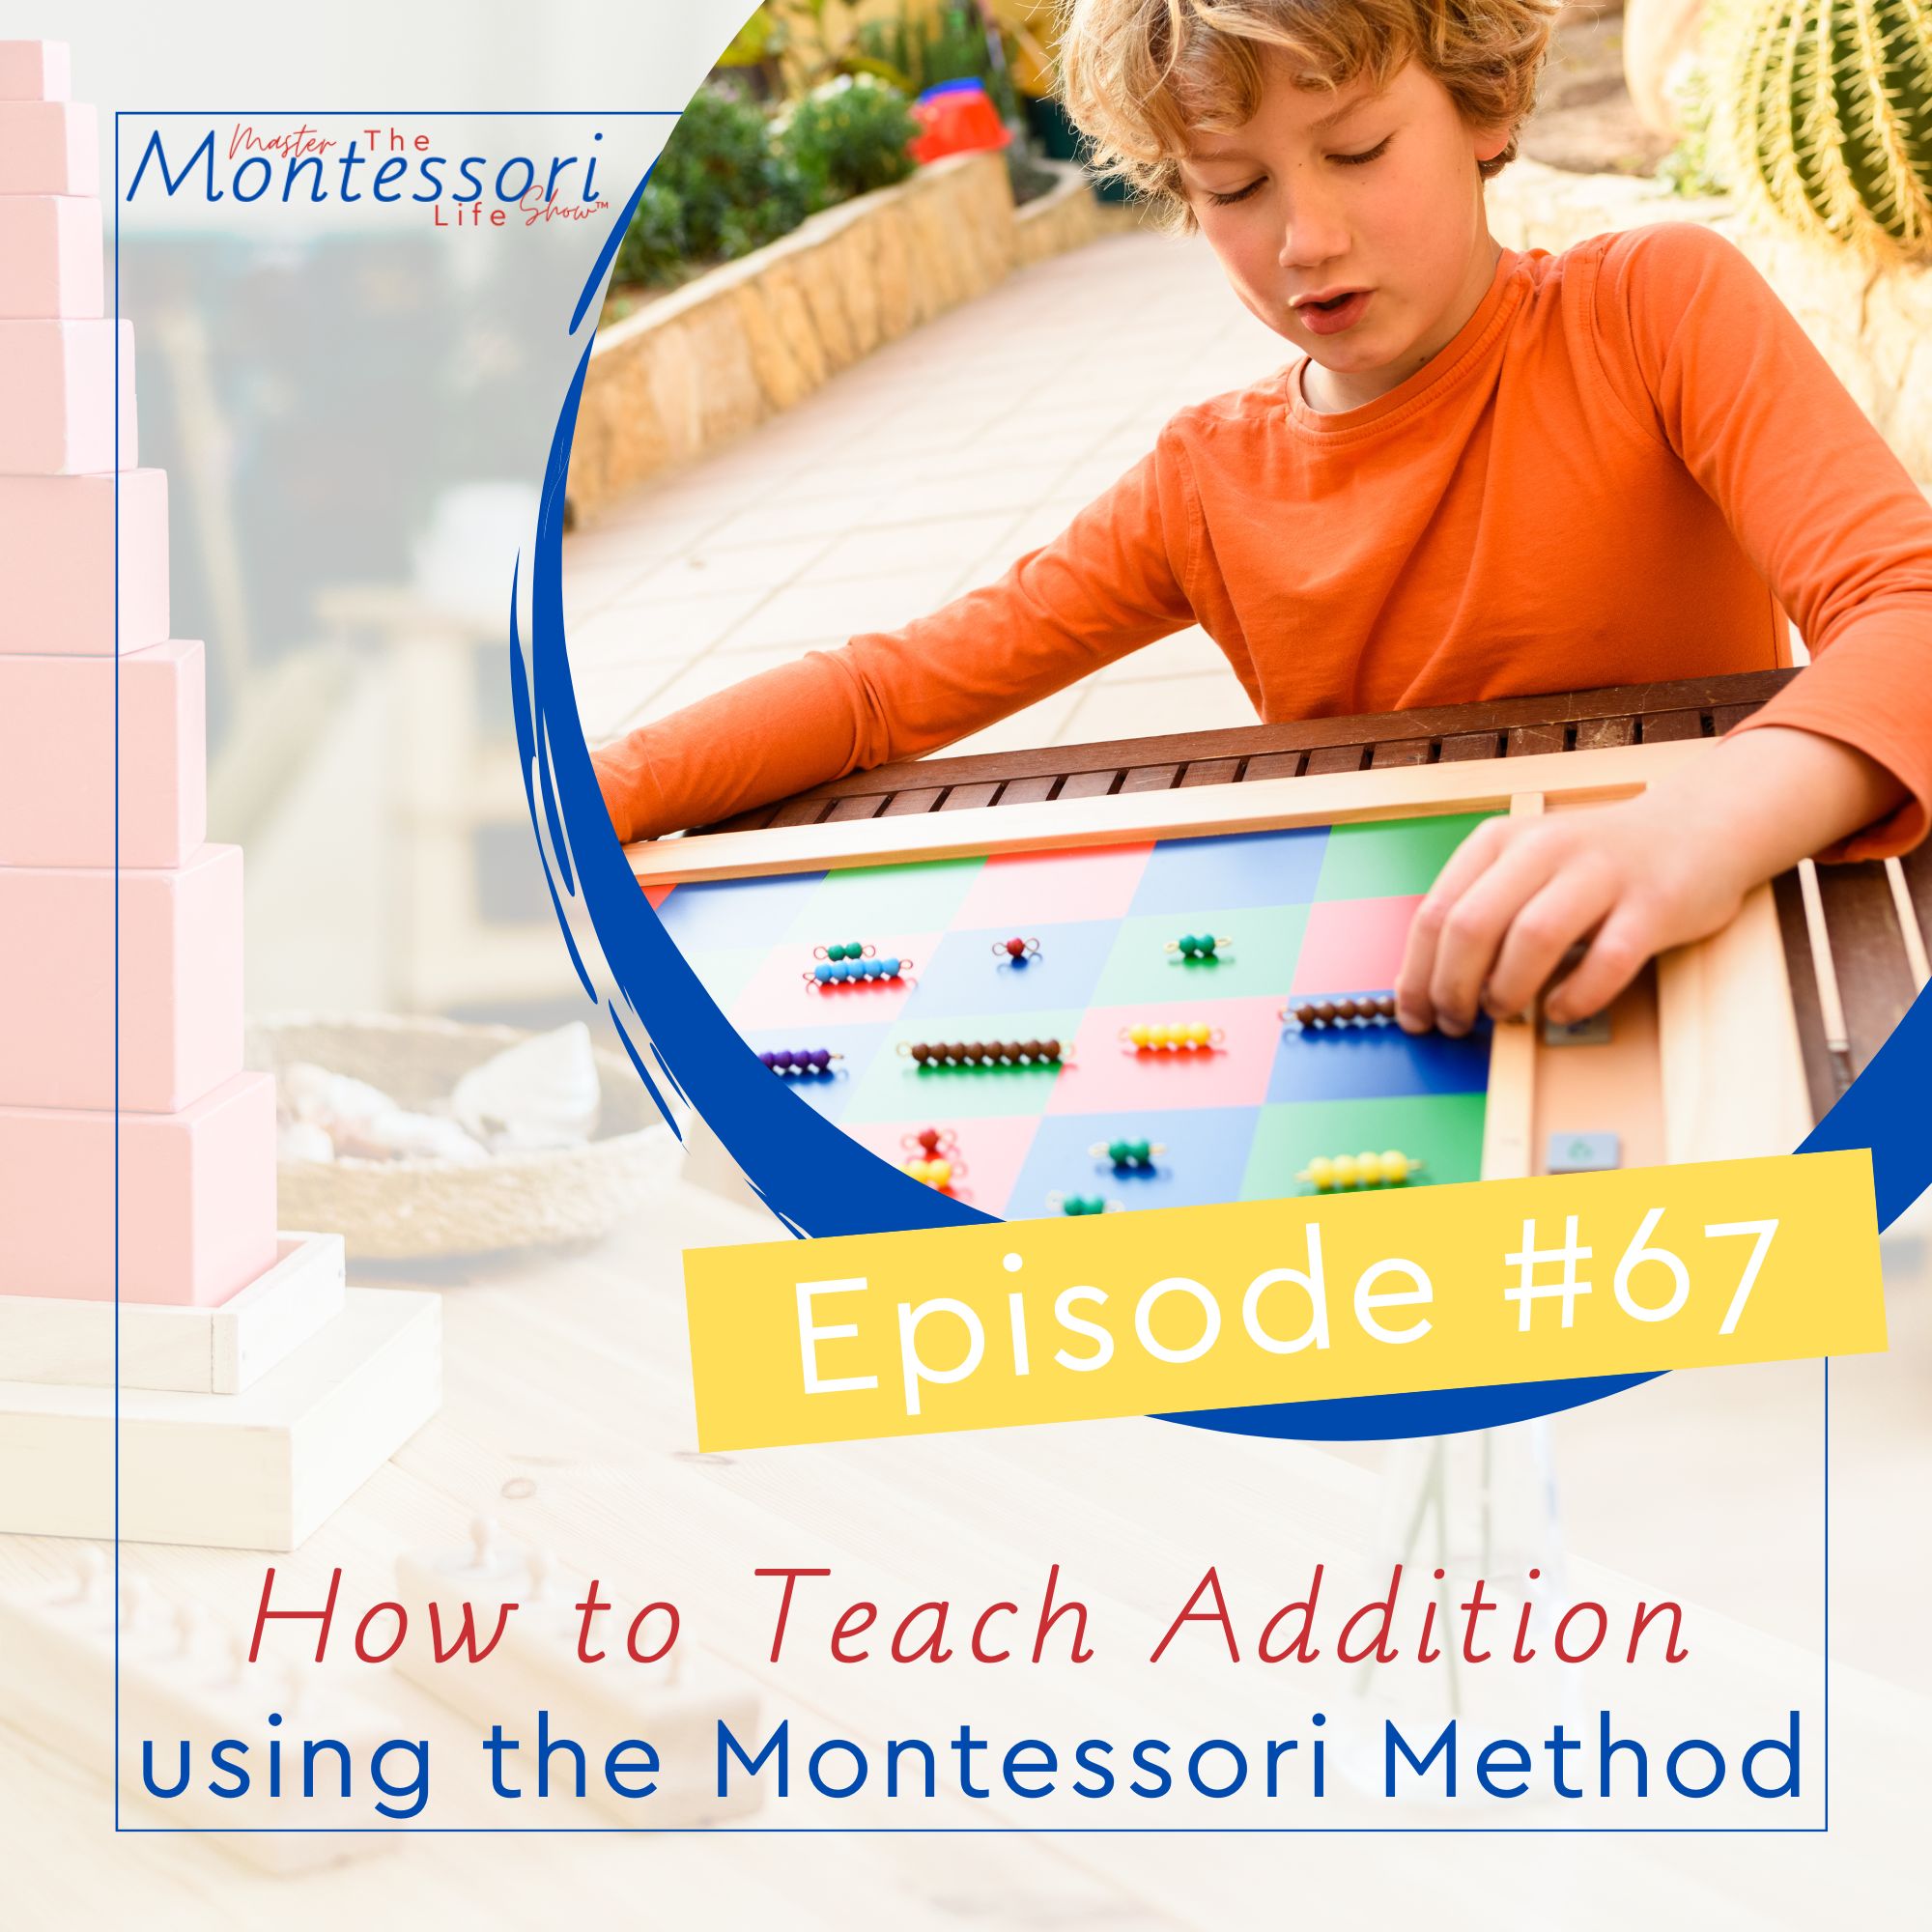 Episode 67: How to Teach Addition using the Montessori Method